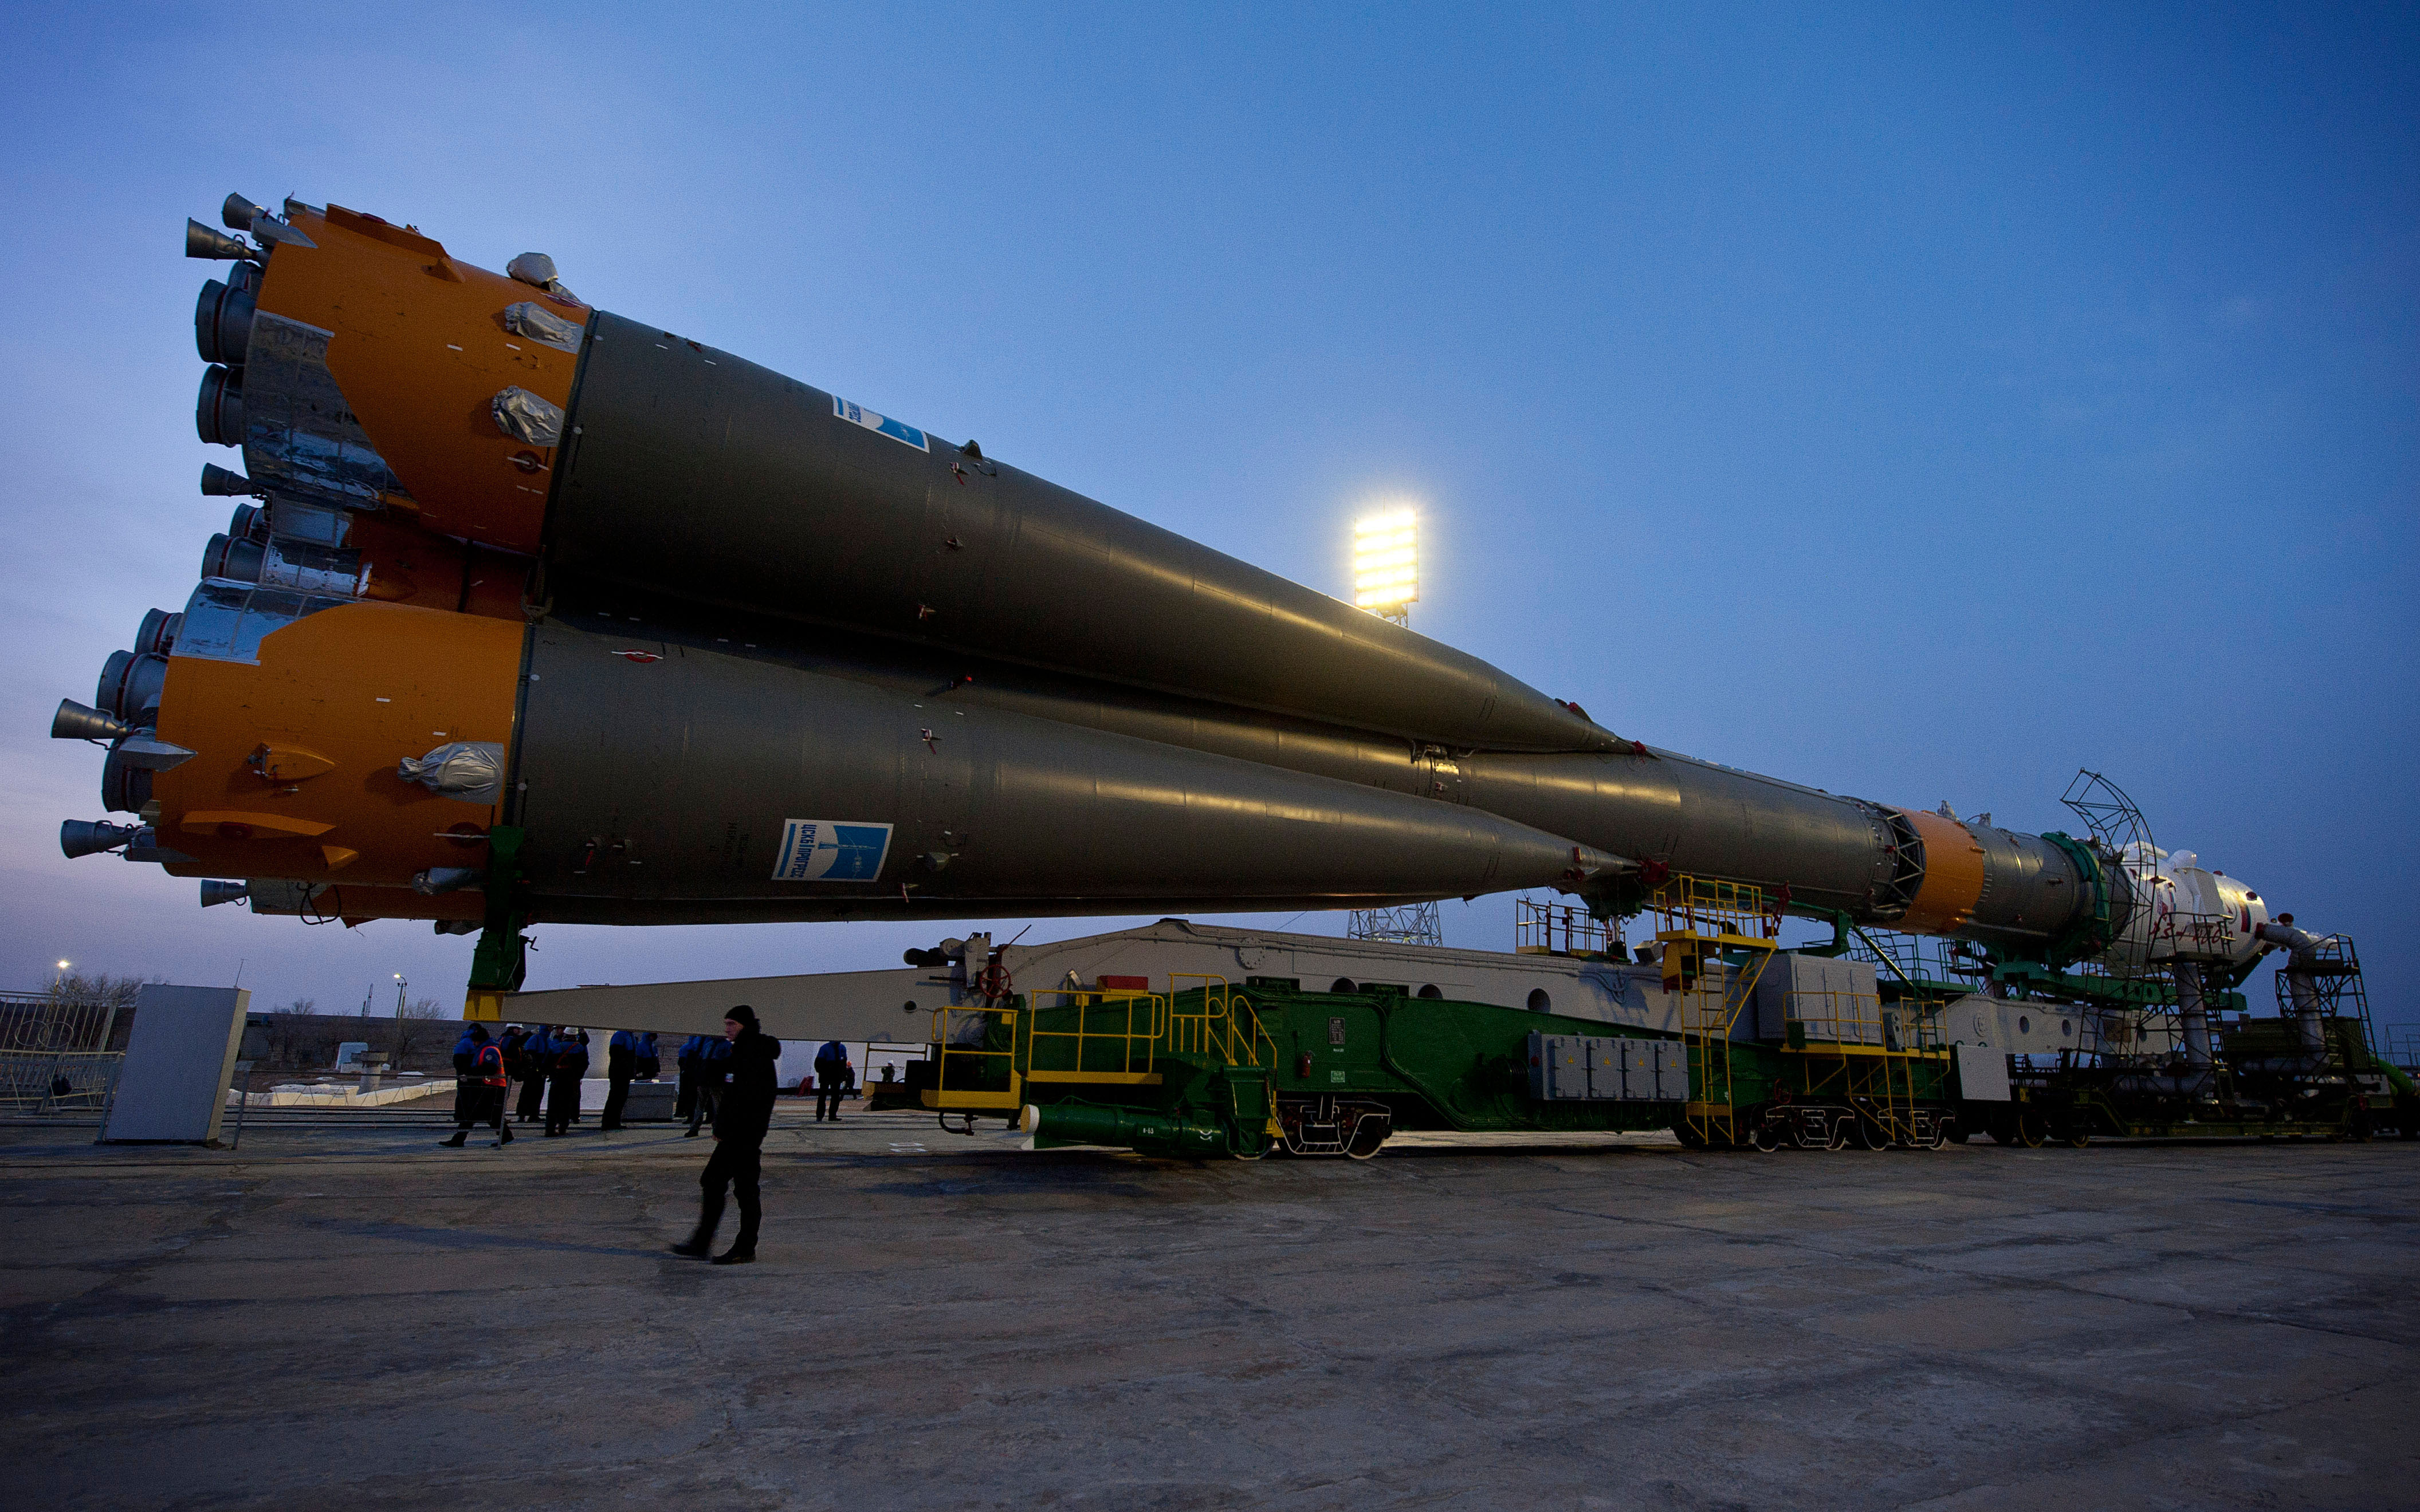 Soyuz TMA-20 spacecraft arrives at the launch pad